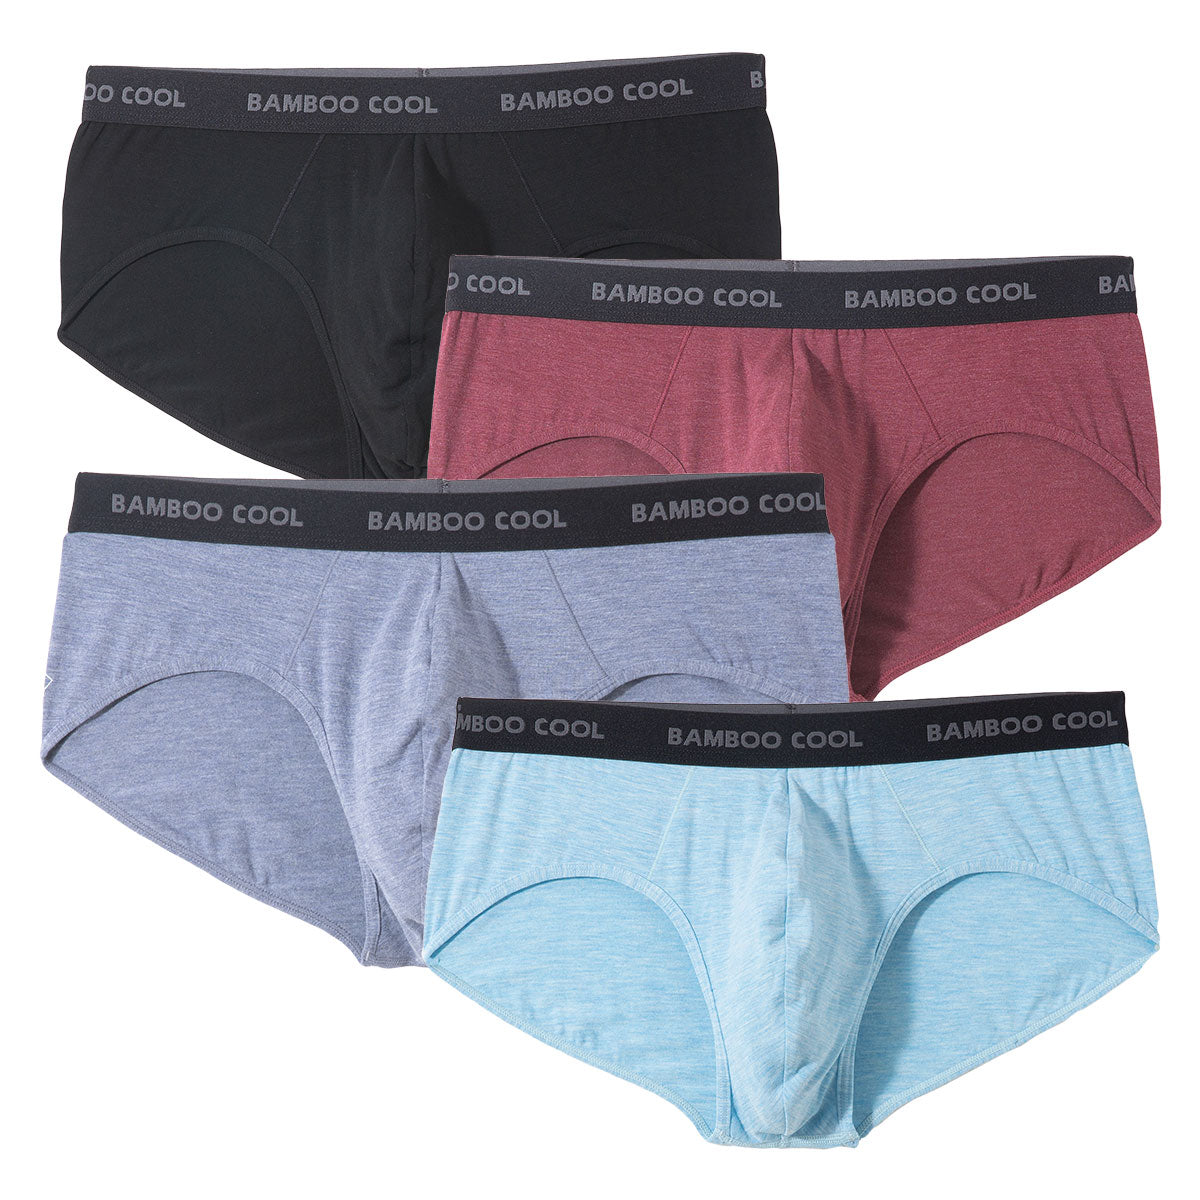 BAMBOO COOL Men's Underwear Boxer Briefs Soft Breathable Bamboo Underwear 4  Pack